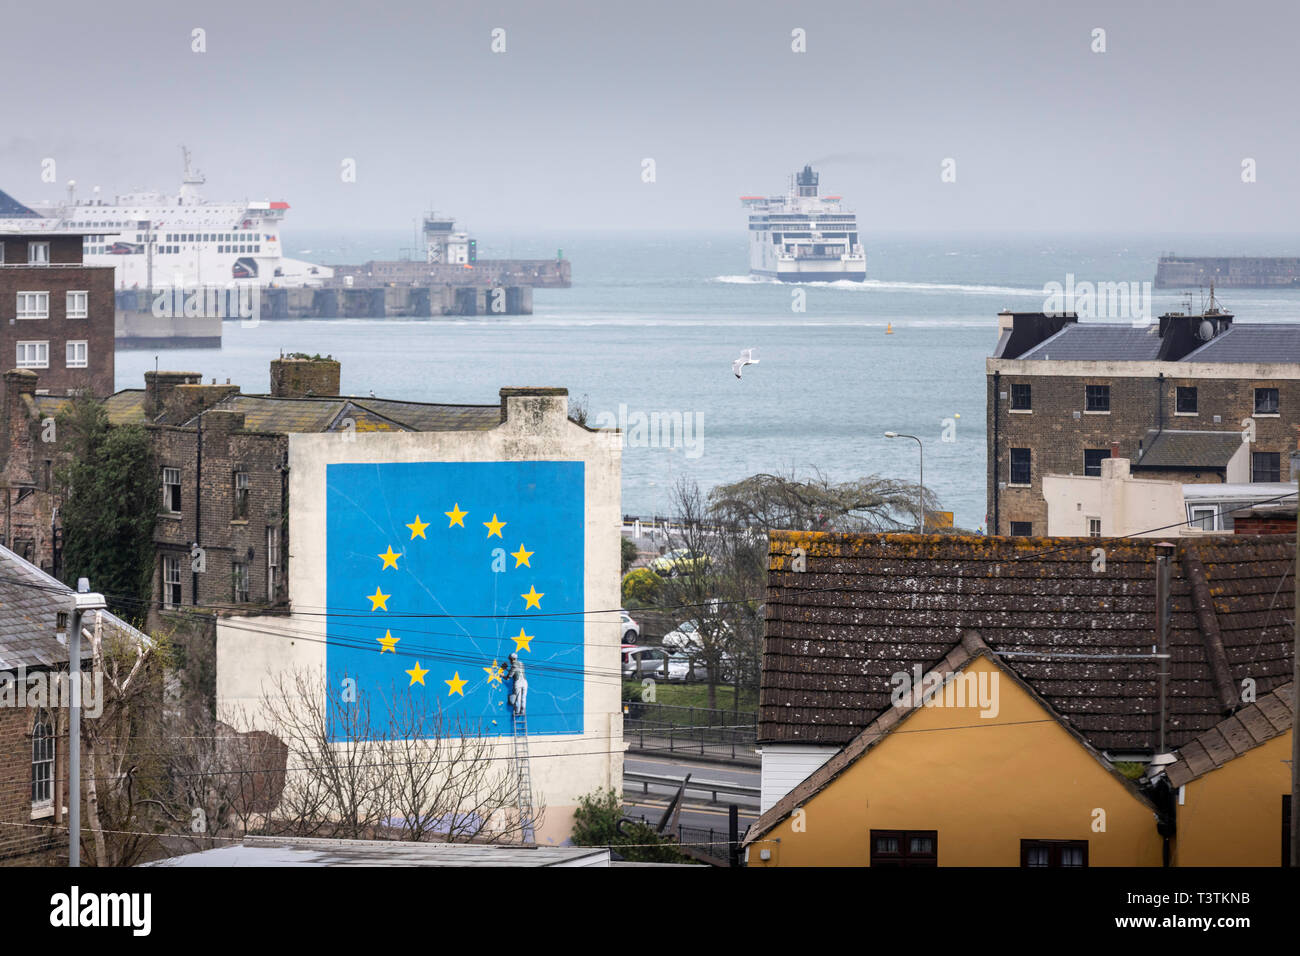 What next for Brexit?? A ferry departs the Port of Dover where Banksy's famous Brexit mural stands large on the side of a derelict building.   Picture Stock Photo